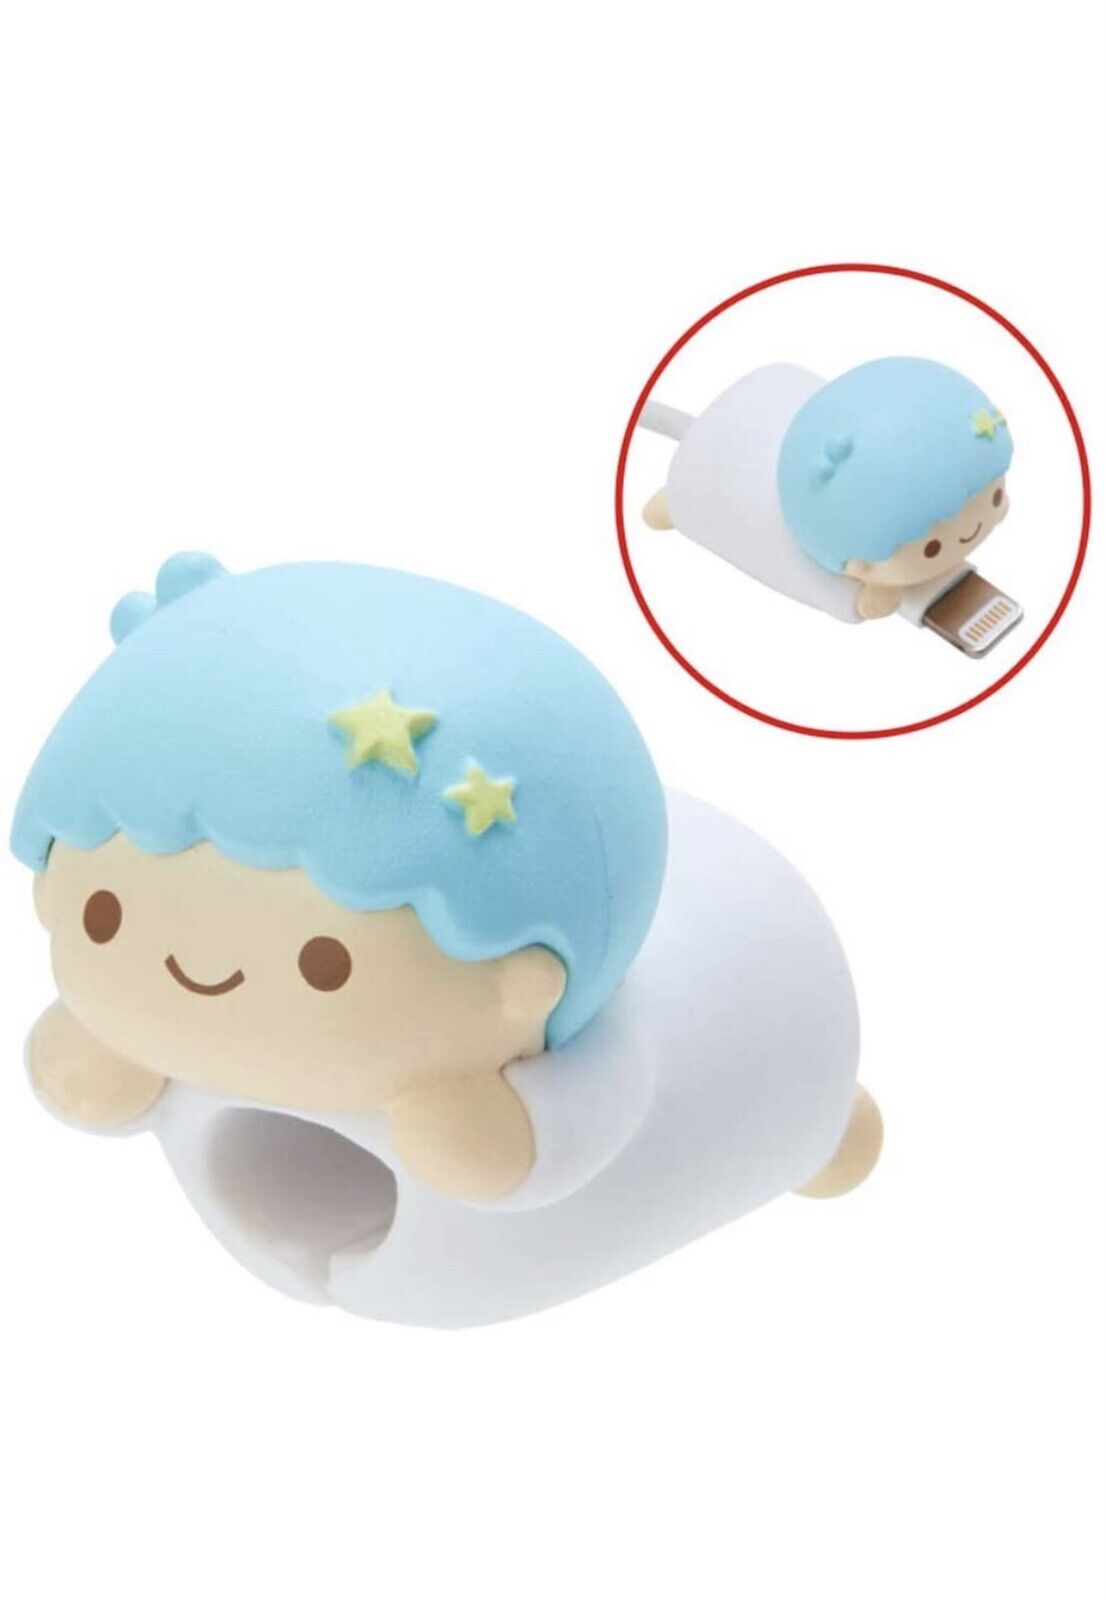 Cute New Sanrio Little Twin Stars Kiki Cable Bite Character iPhone Cable Protect